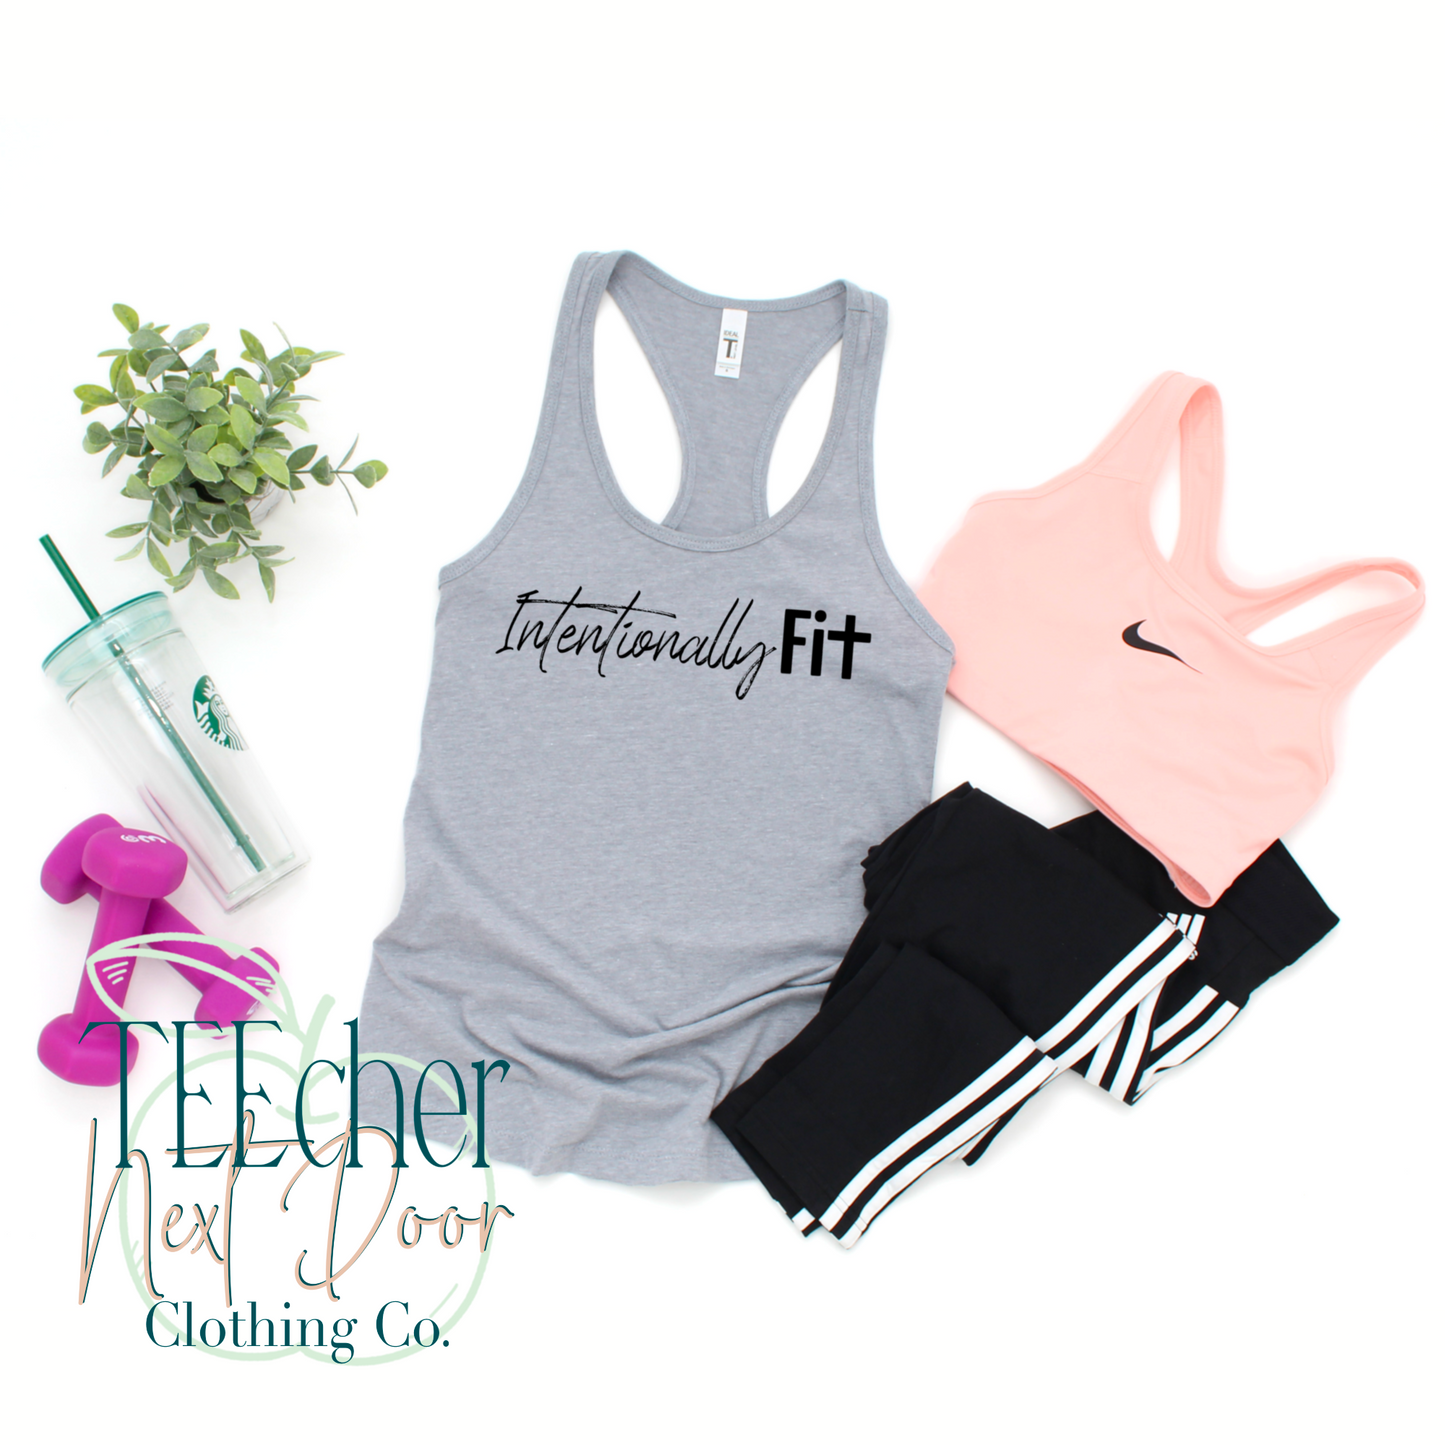 Intentionally Fit Racerback Tank